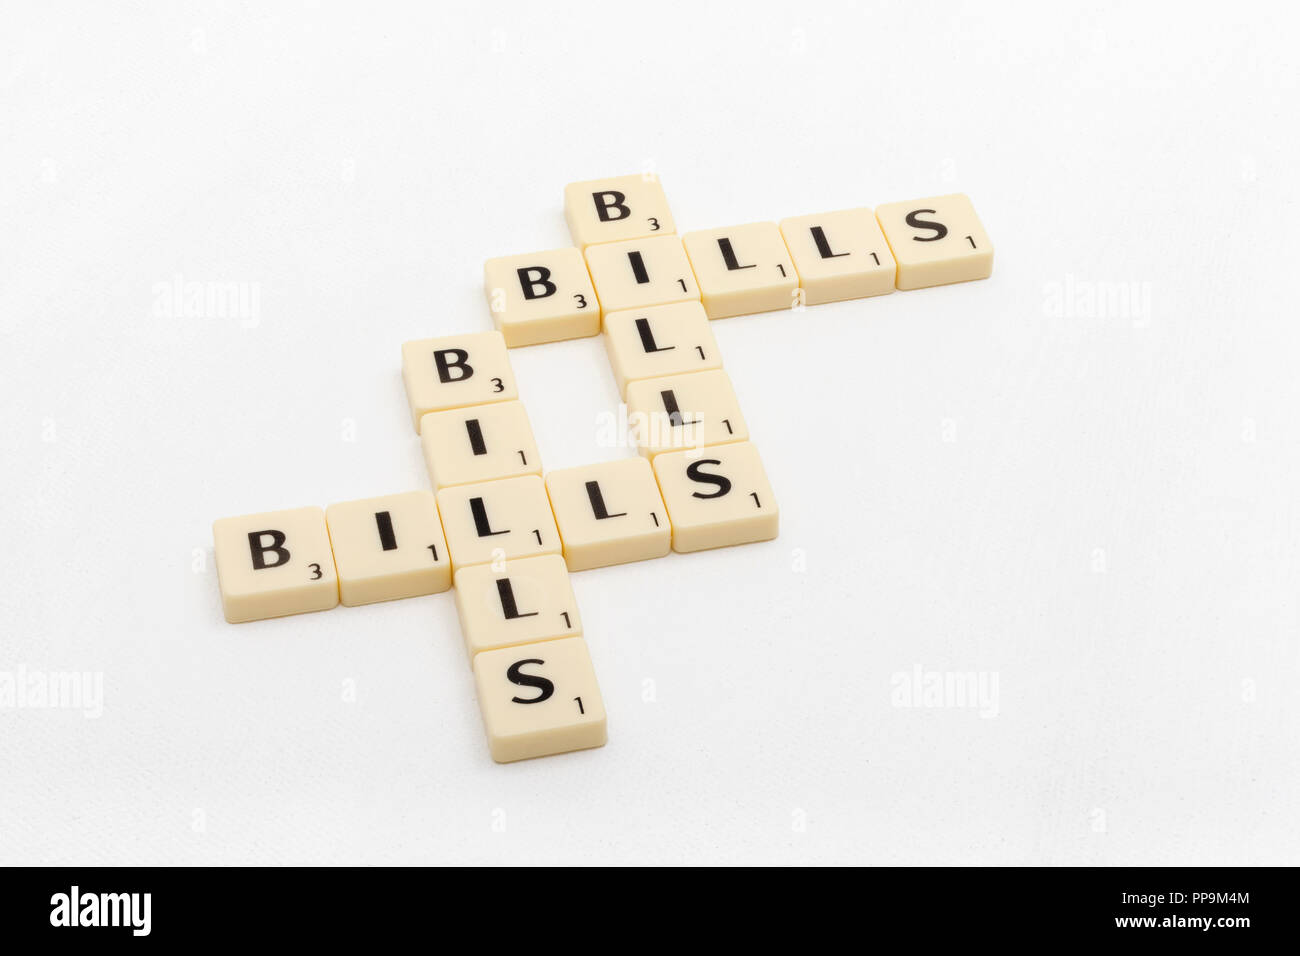 Letter tiles spelling out aspects of personal finances / financial management, financial crisis, running up bills, debts etc. Stock Photo